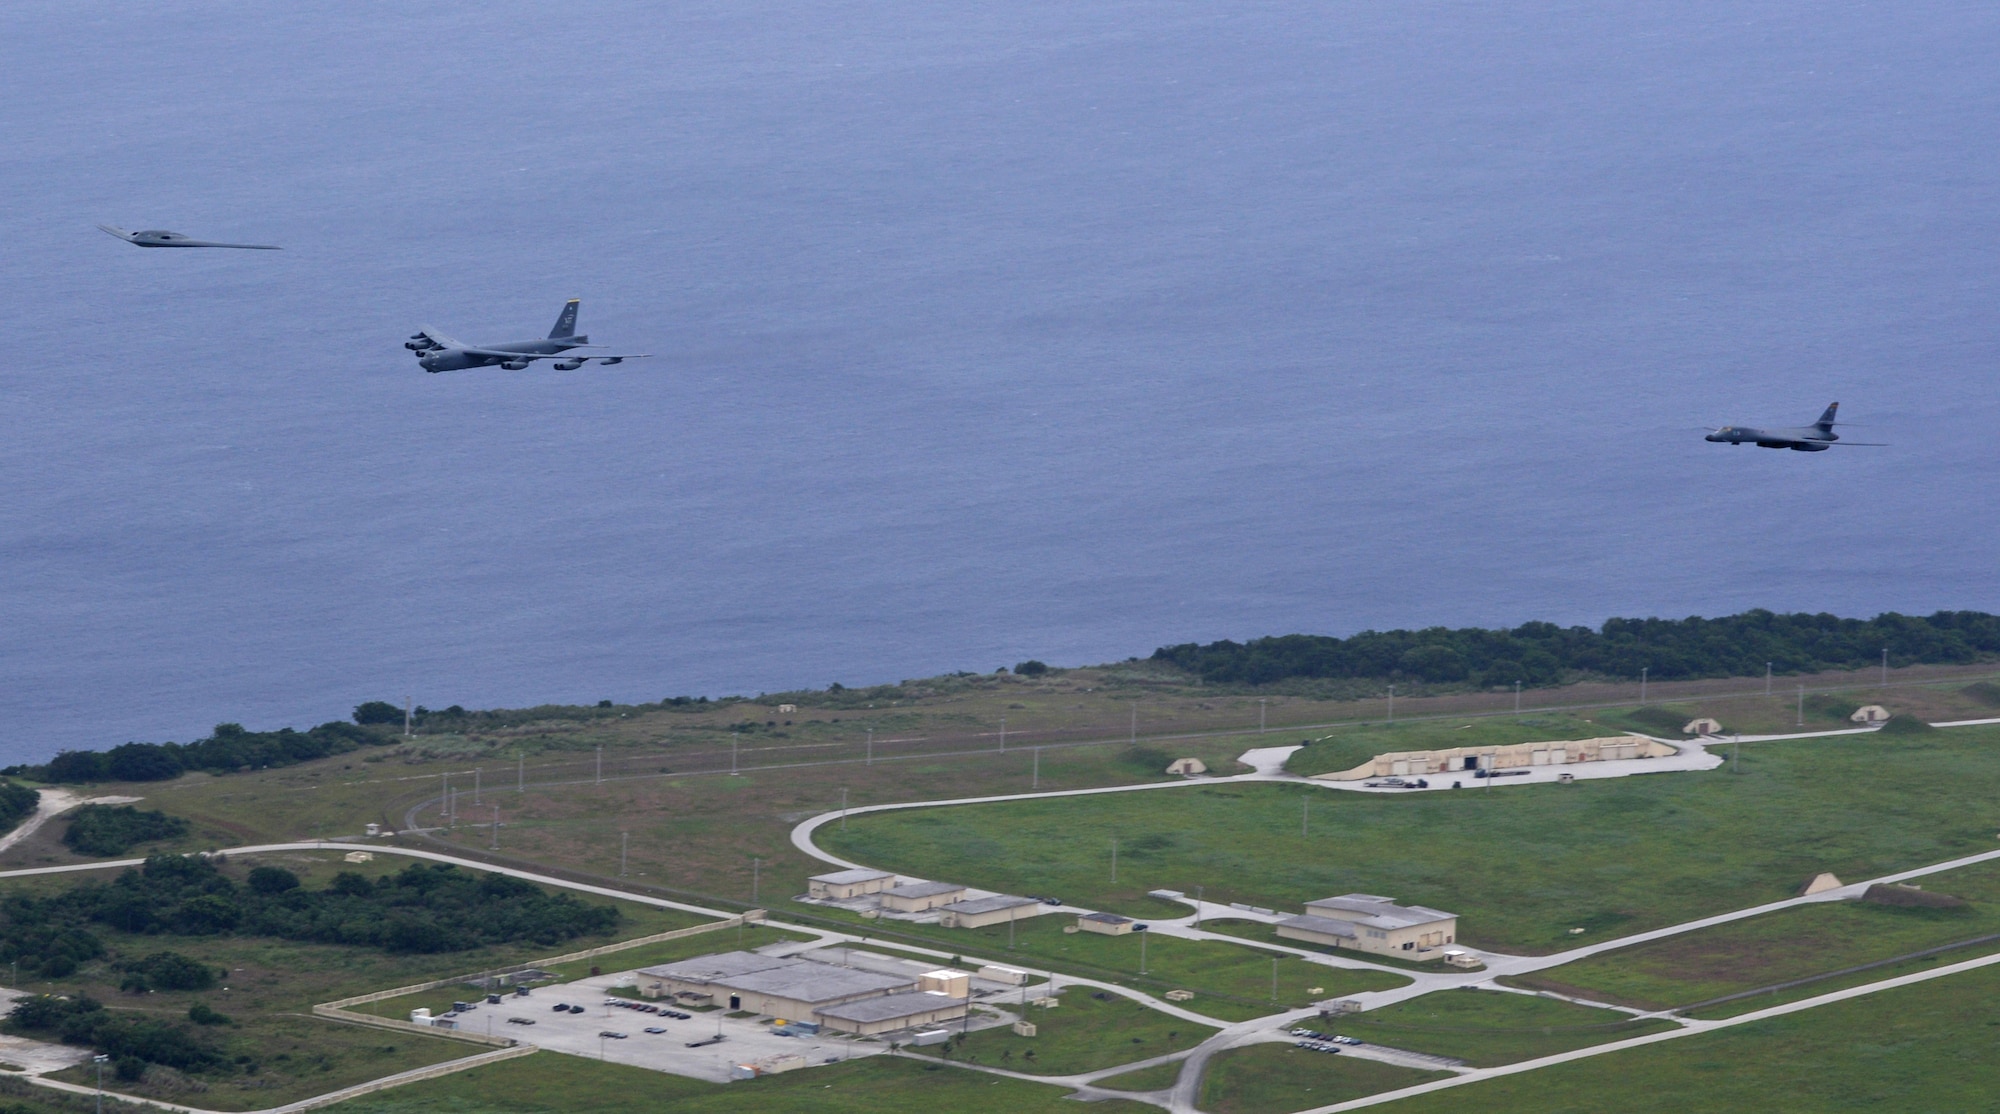 A U.S. Air Force B-52 Stratofortress, B-1 Lancer and B-2 Spirit launch from Andersen Air Force Base, Guam, for an integrated bomber operation Aug.17, 2016. This mission marks the first time in history that all three of Air Force Global Strike Command's strategic bomber aircraft are simultaneously conducting integrated operations in the U.S. Pacific Command area of operations. As of Aug. 15, the B-1 Lancer will be temporarily deployed to Guam in support of U.S. Pacific Command's Continuous Bomber Presence mission. (U.S. Air Force photo by Senior Airman Joshua Smoot)